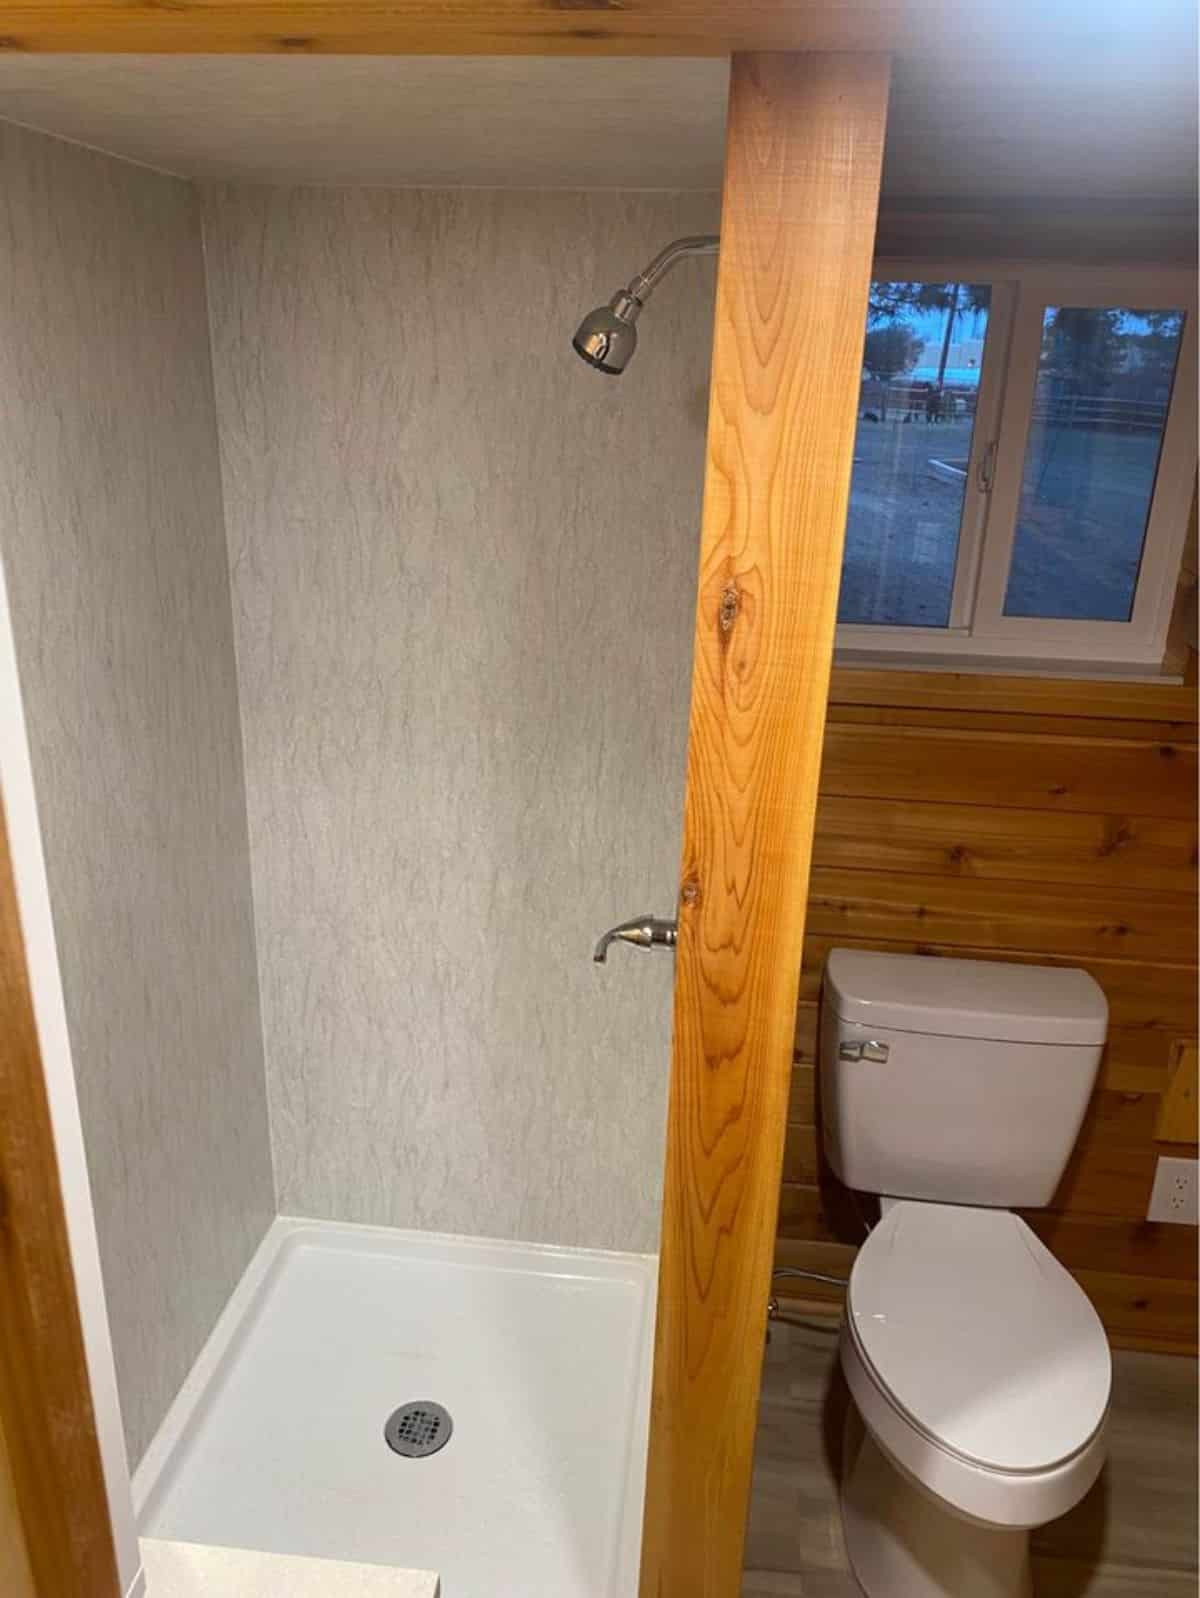 standard toilet, full length shower area in bathroom of double lofted tiny home